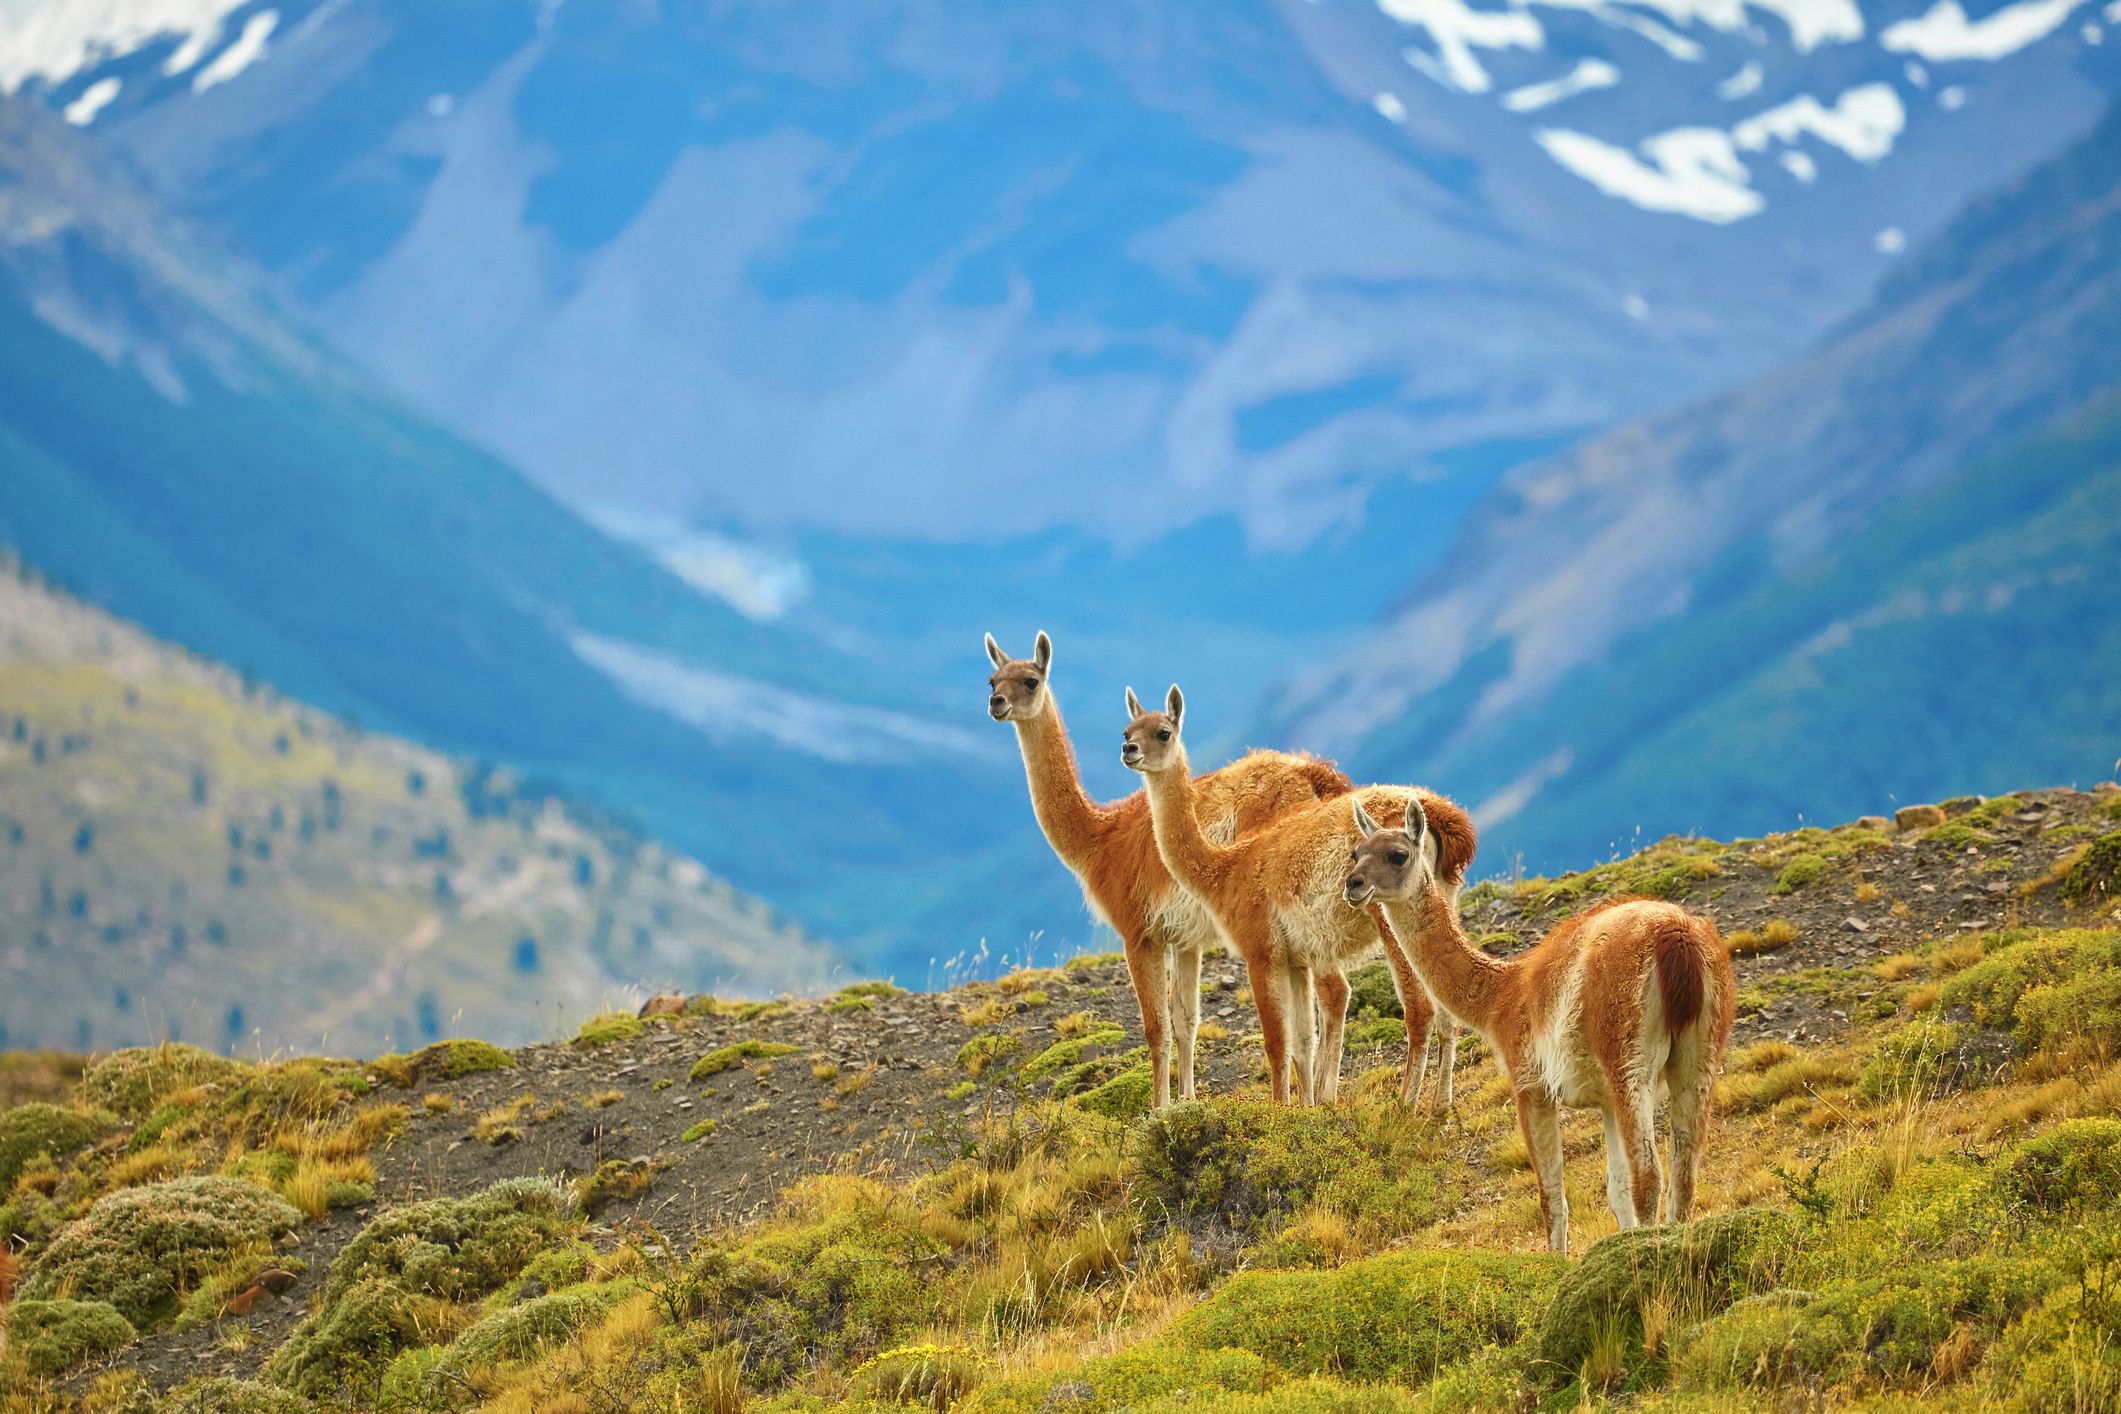 Guanaco, pictured in their natural habitat in Chile, rather than Dumfries. (Image: iStock)